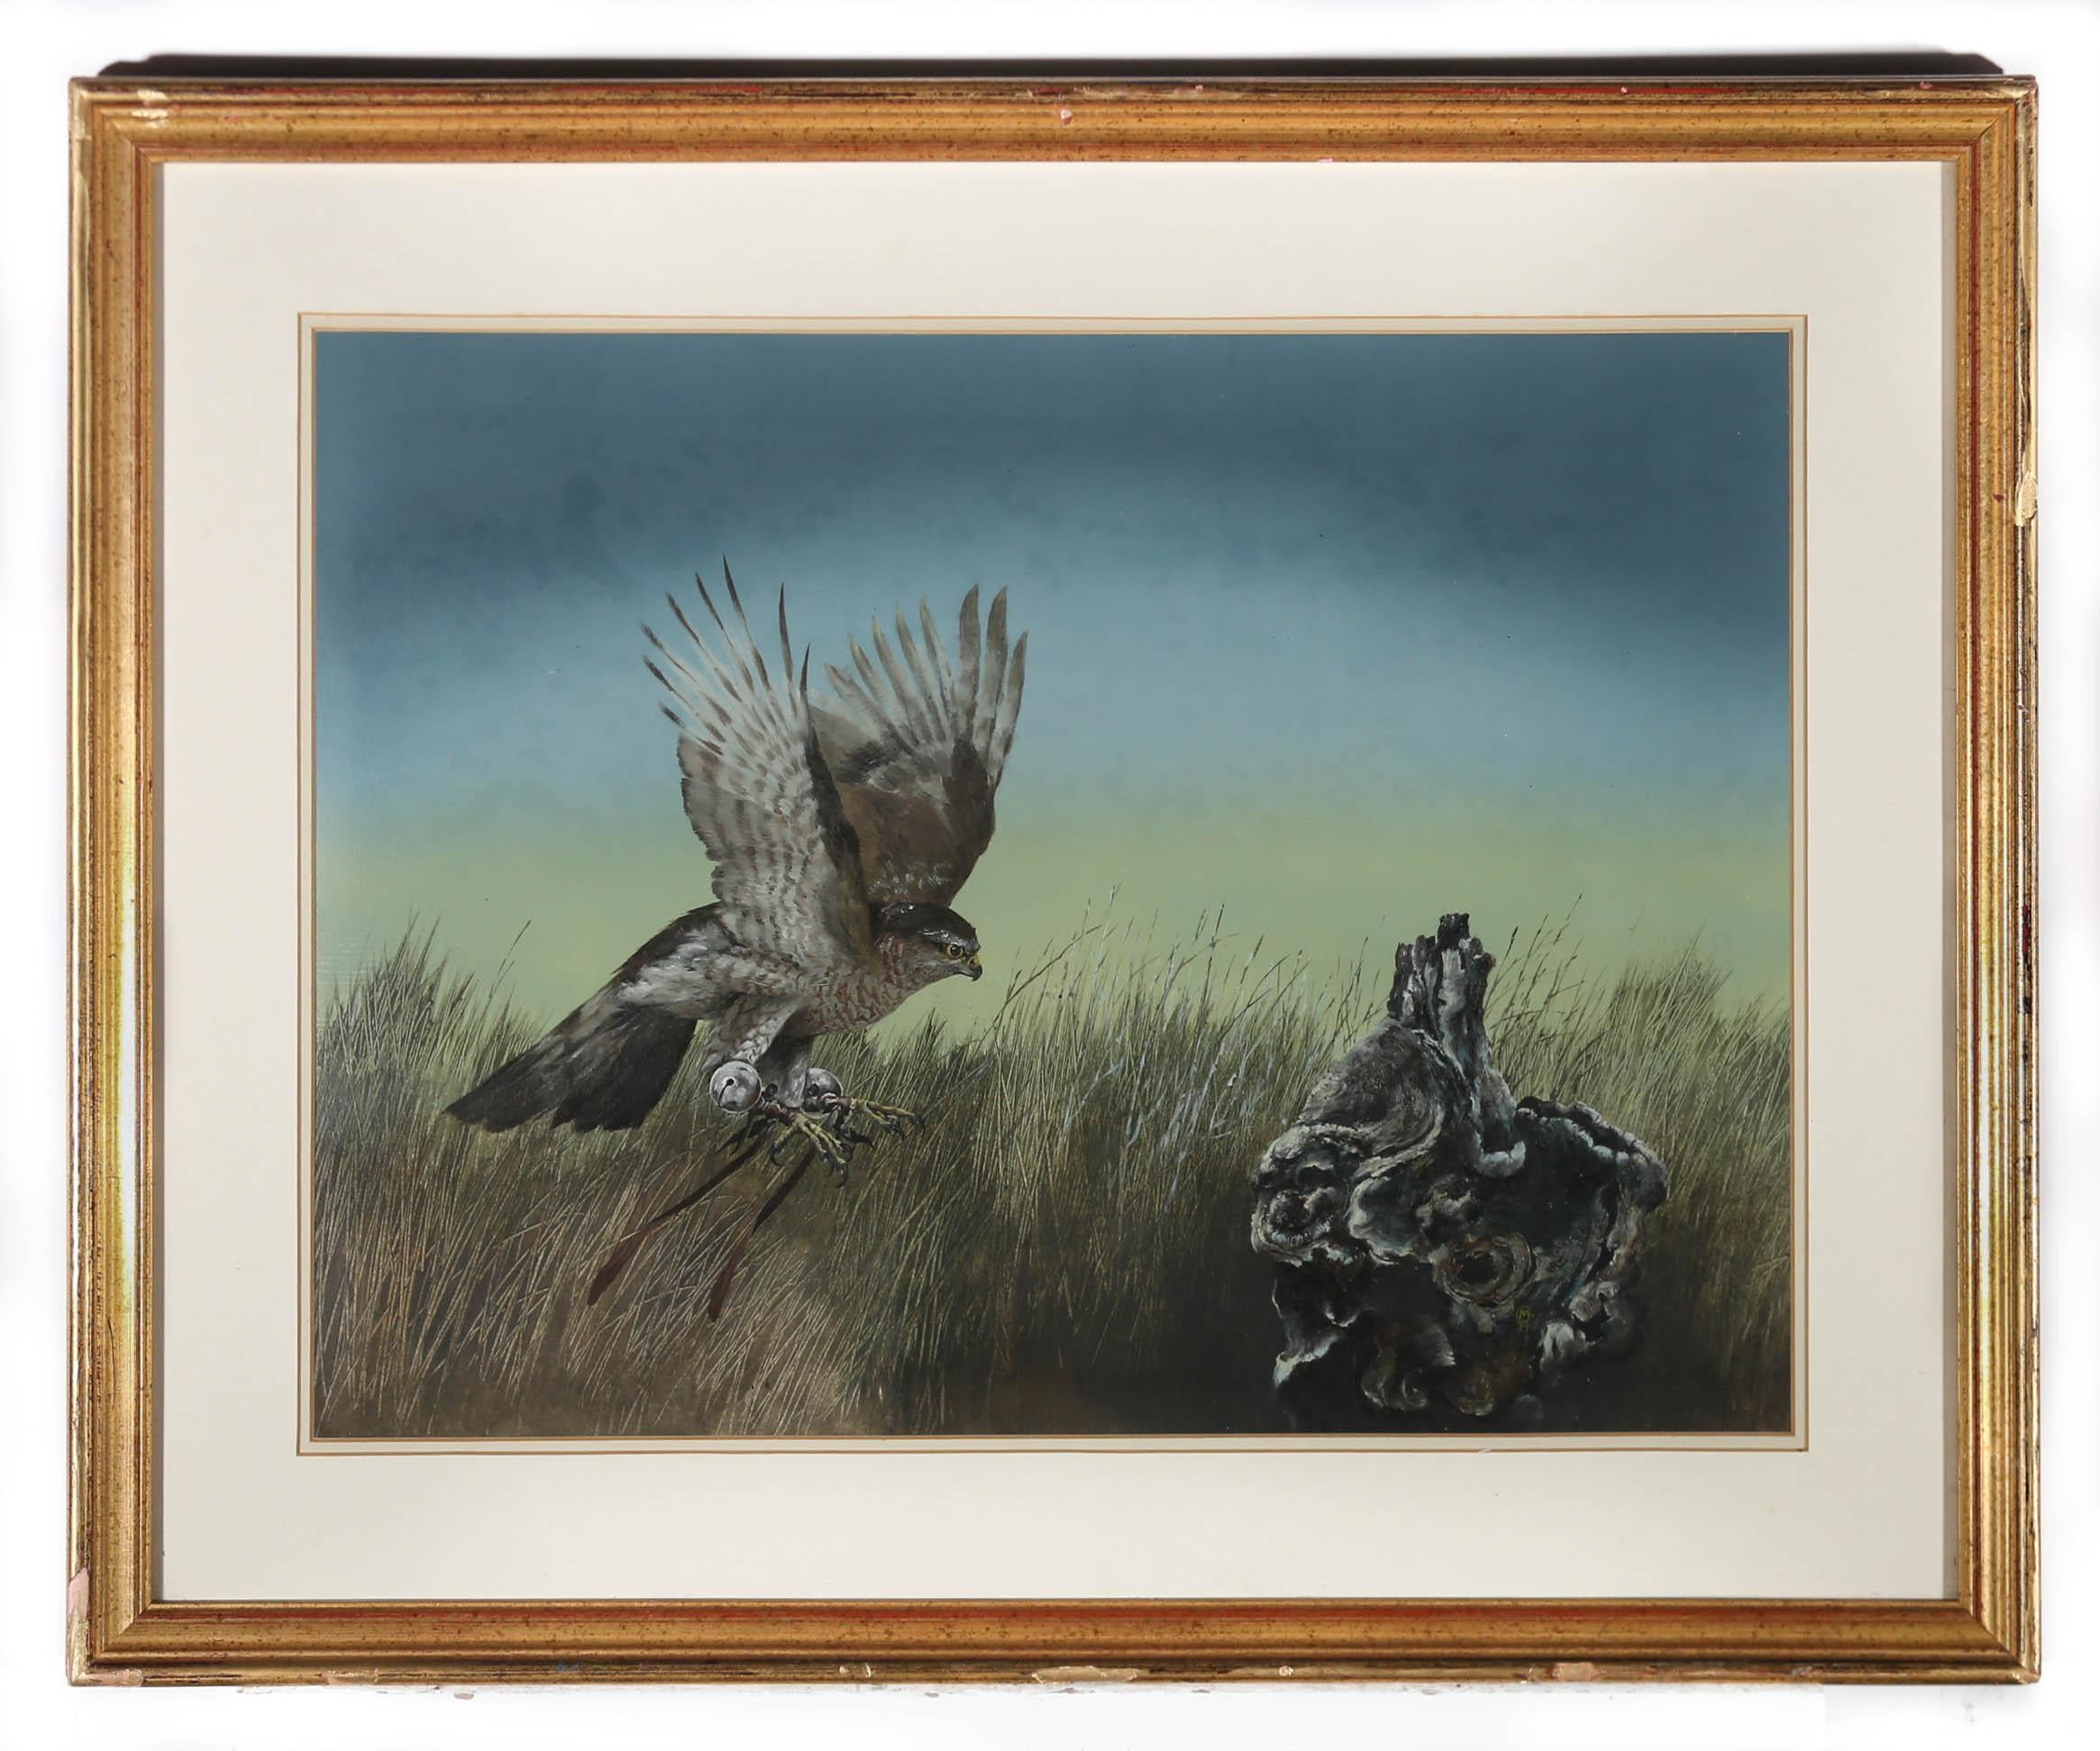 An original gouache scene by wildlife artist Martin Knowellden, depicting a bird of prey landing in a covered landscape. Signed with the artist's monogram to the lower right. Well-presented in a fine gilt frame. On paper.